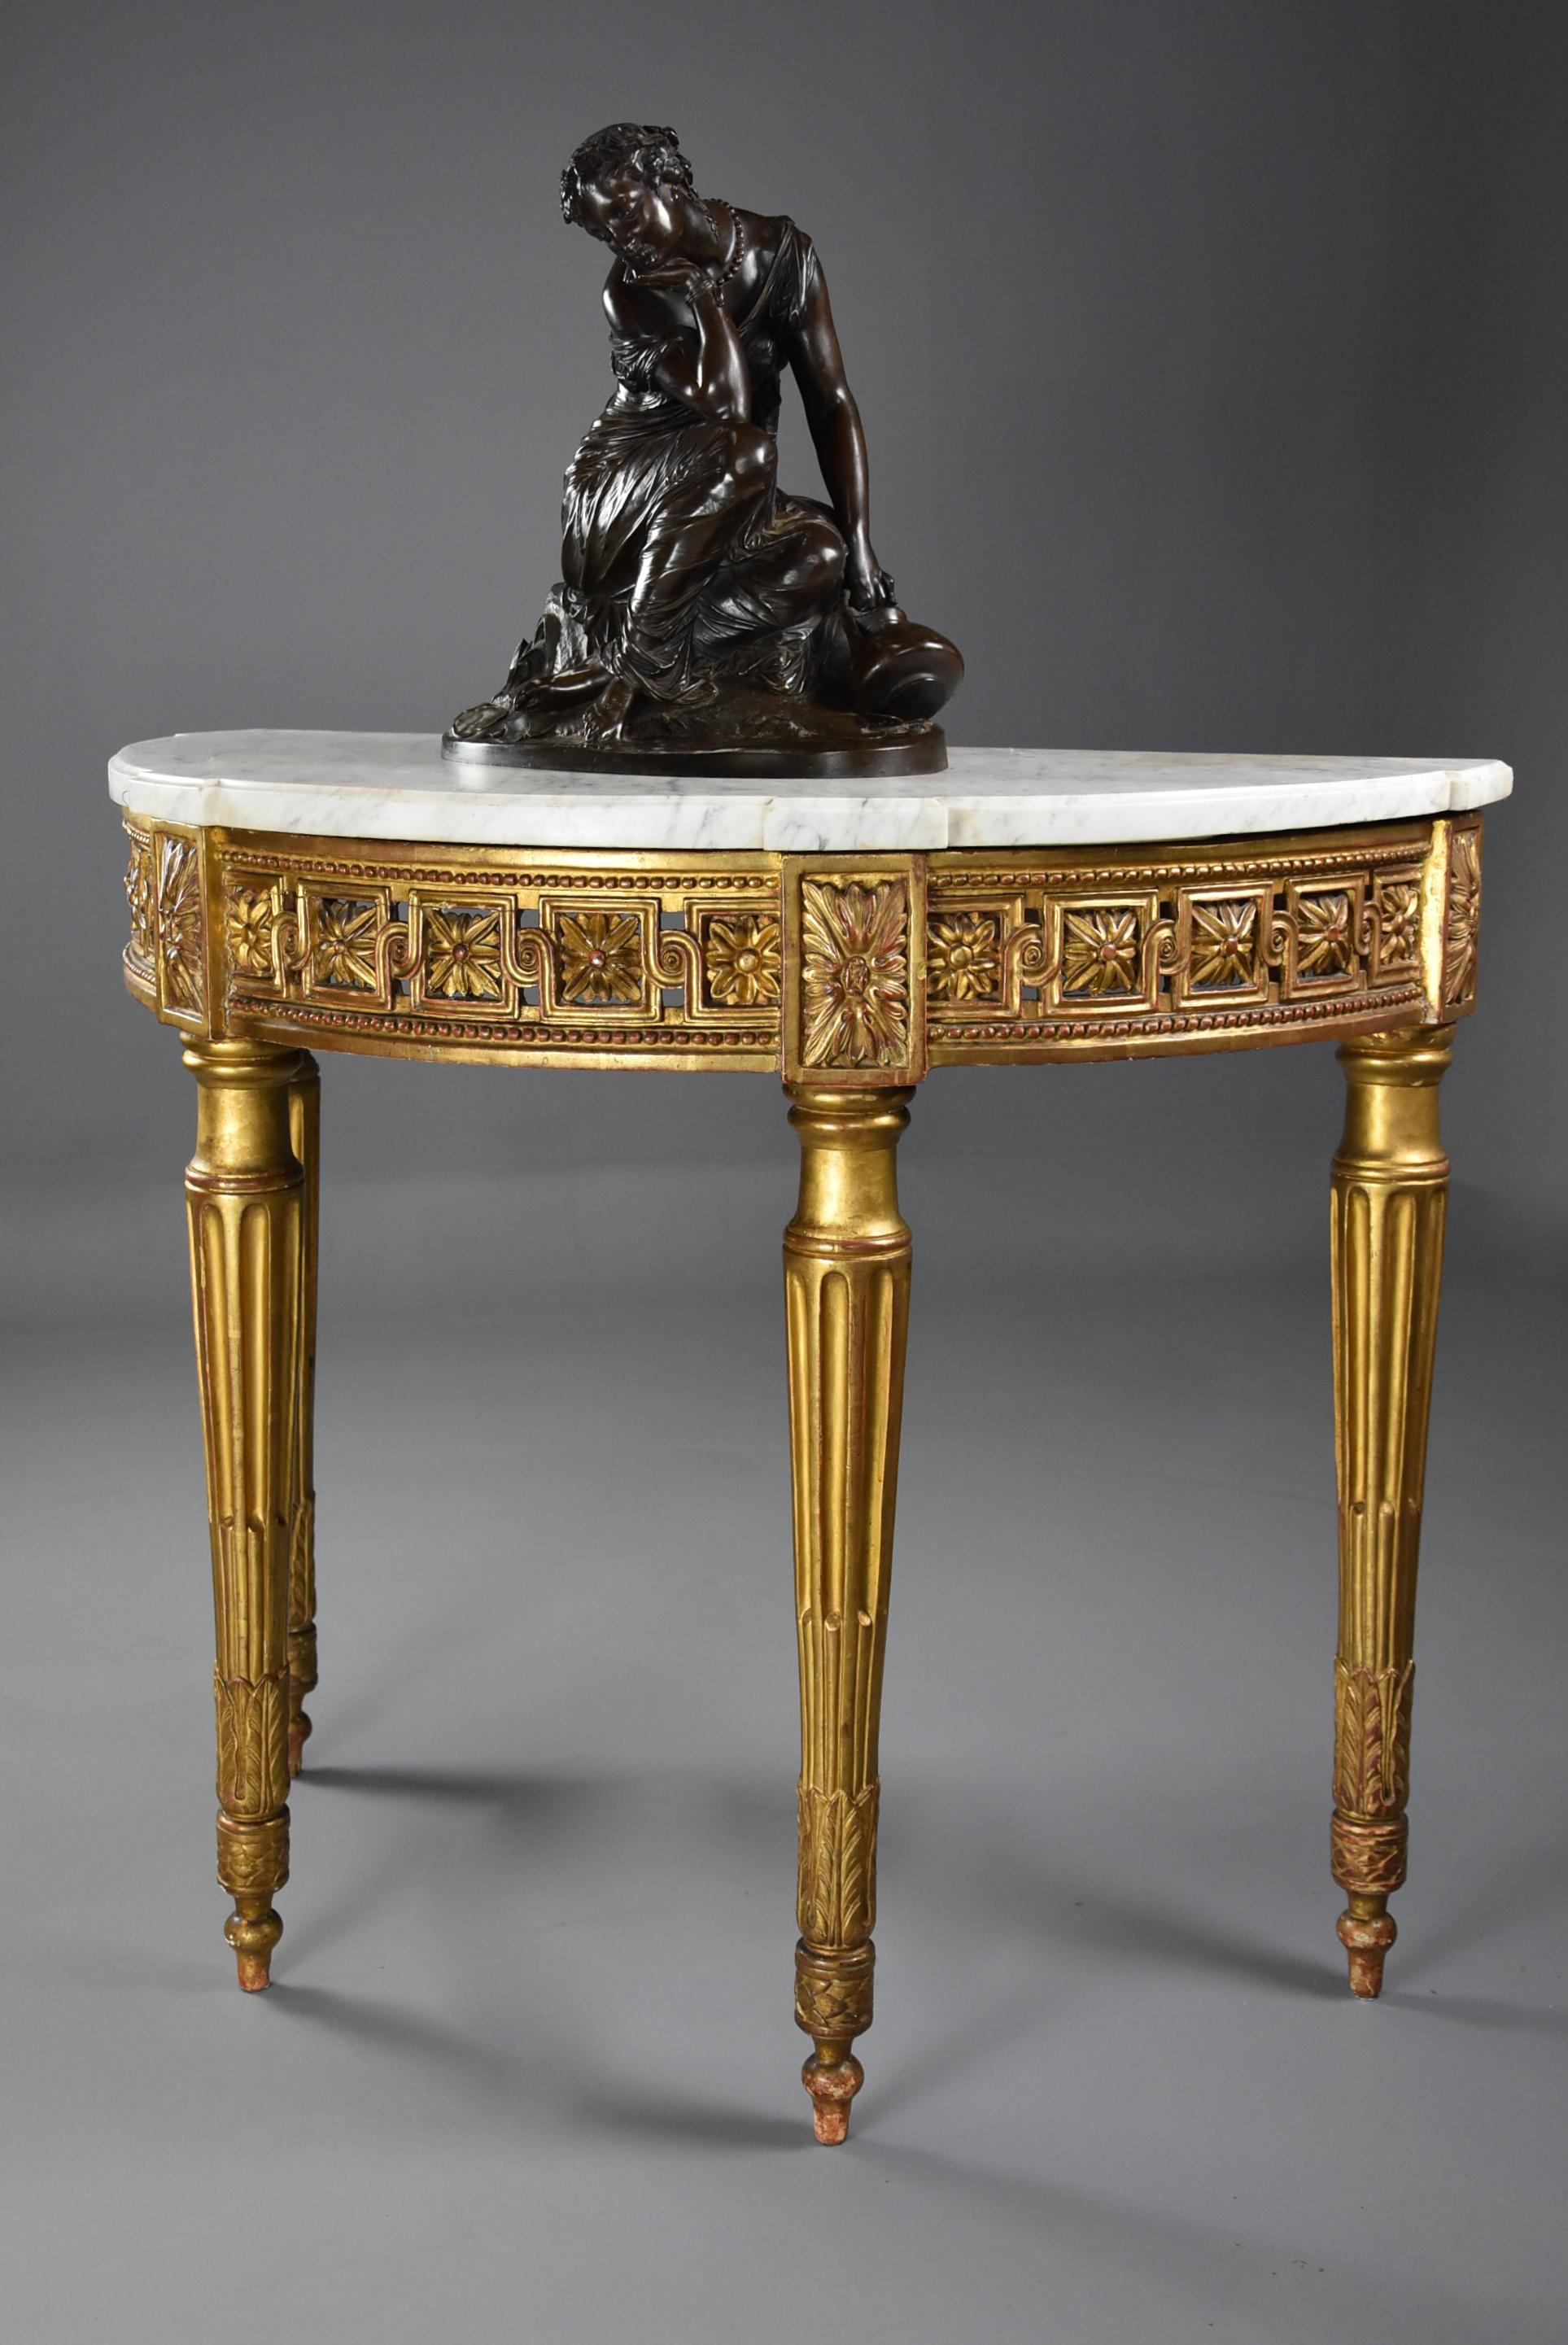 A highly decorative late 19th century French demilune gilt console table.

This table consists of a demilune shaped white marble top, the top with evidence of an old repair but in stable condition. 

The top is supported by a finely carved